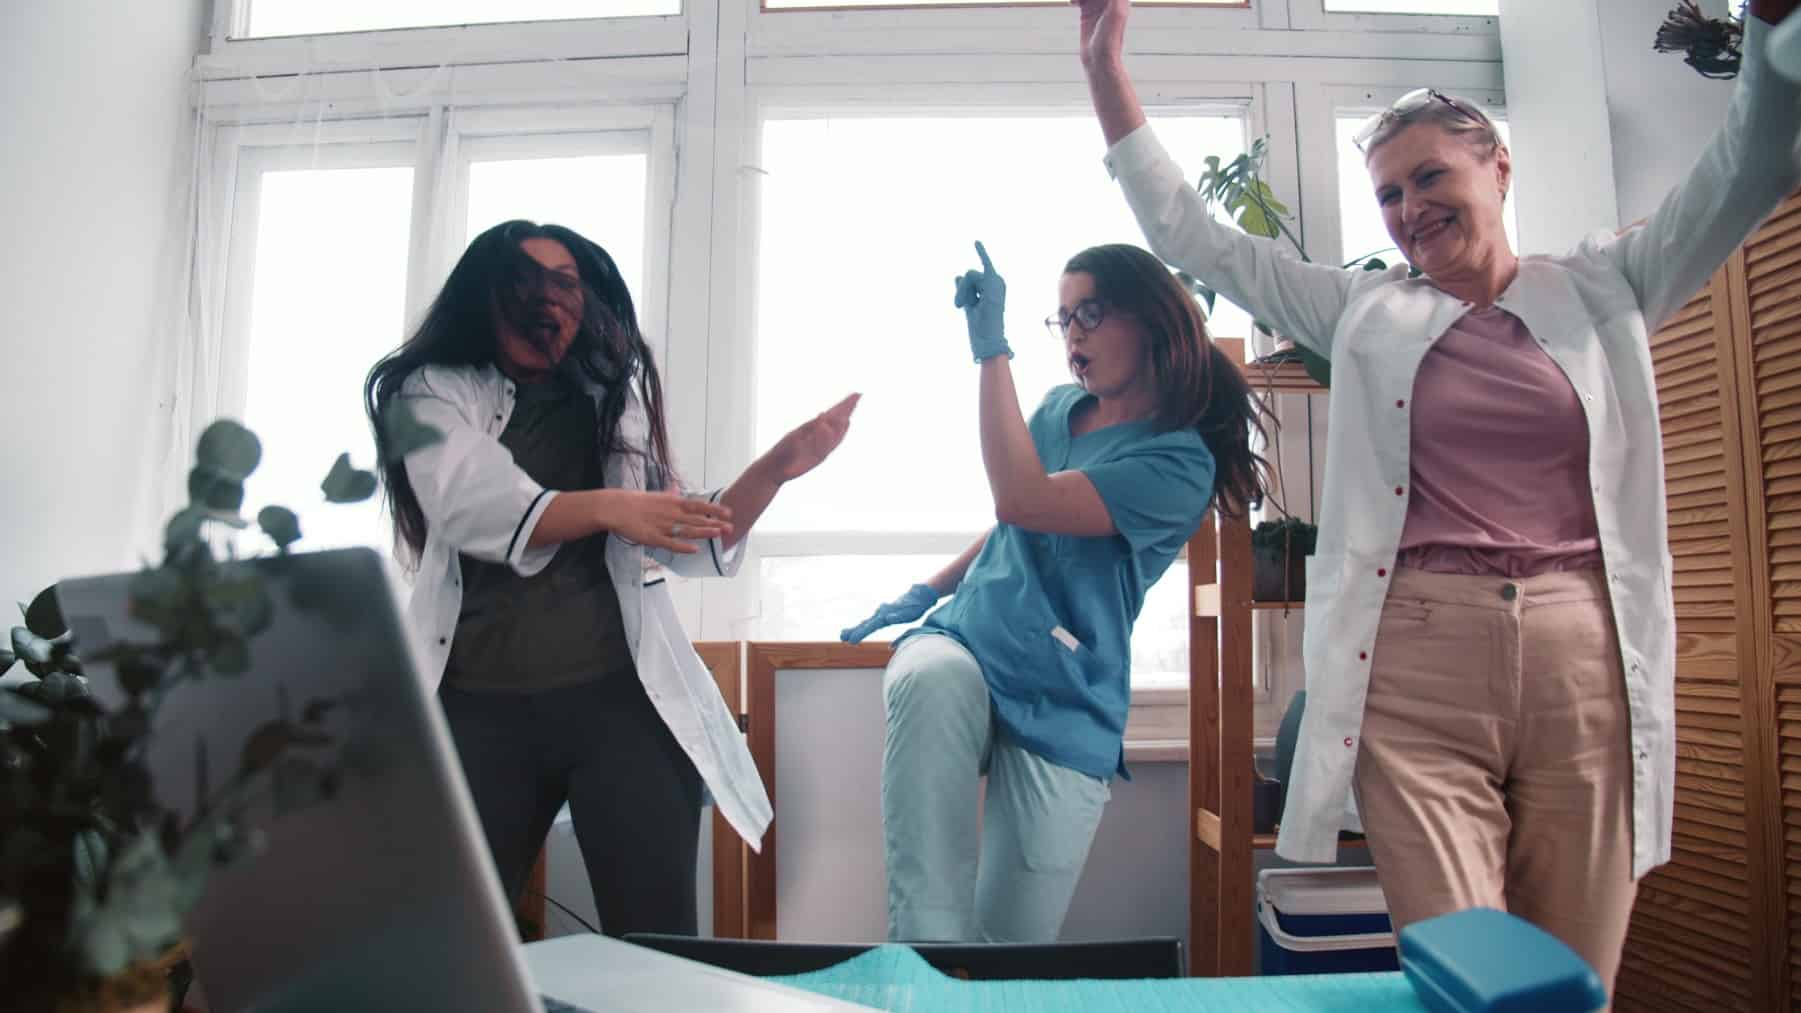 rising medical asx share price represented by excited doctors dancing in ward